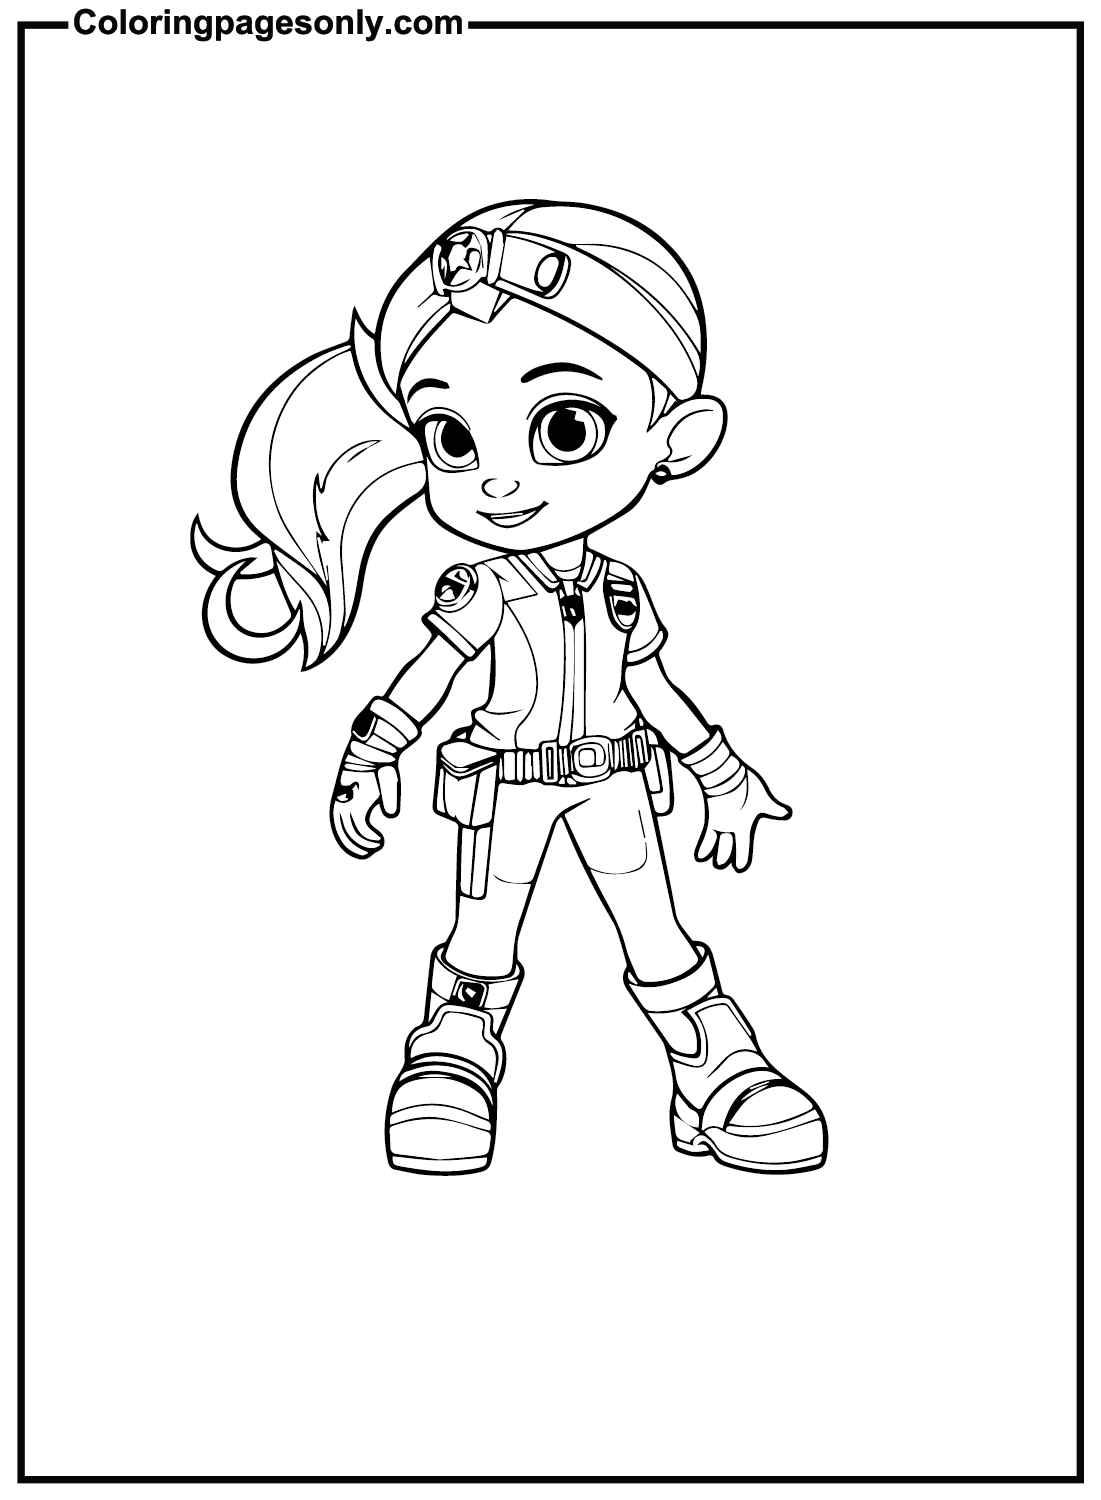 Rainbow Rangers Images Coloring Pages